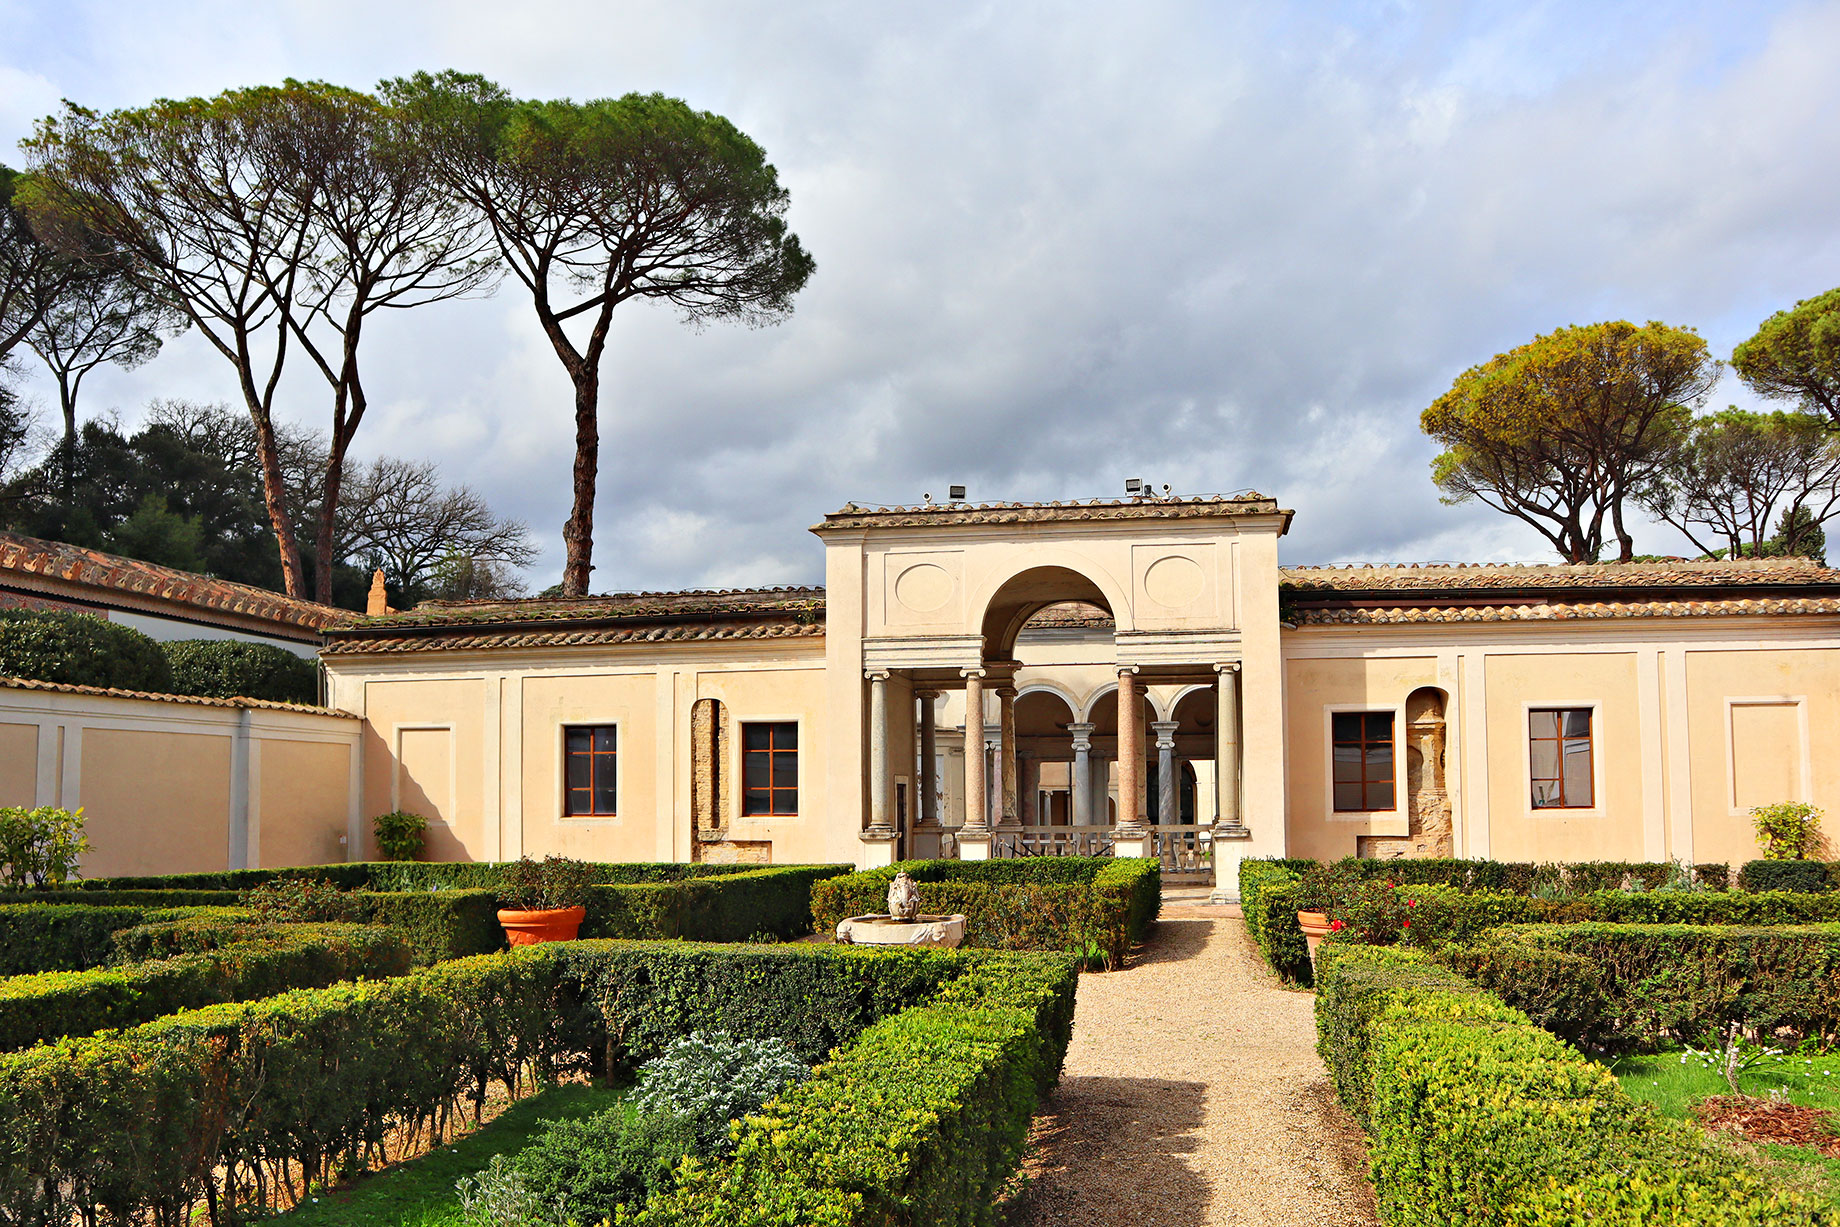 National Etruscan Museum of Villa Giulia - Rome, Italy